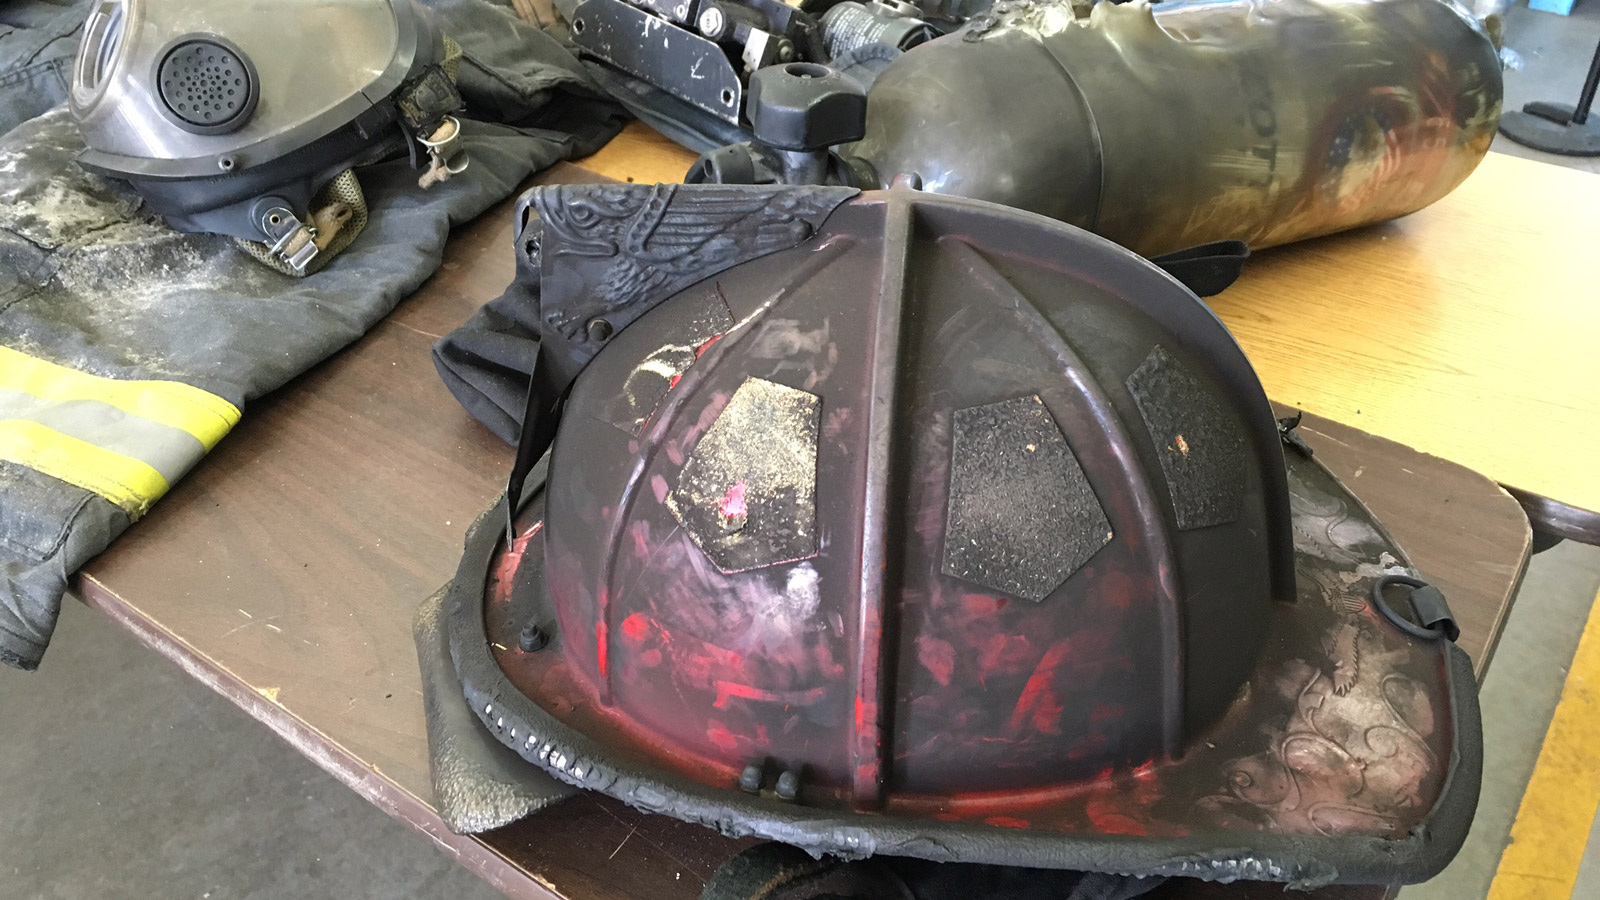 Firefighters Show Off Burned Equipment After Rescue CBS